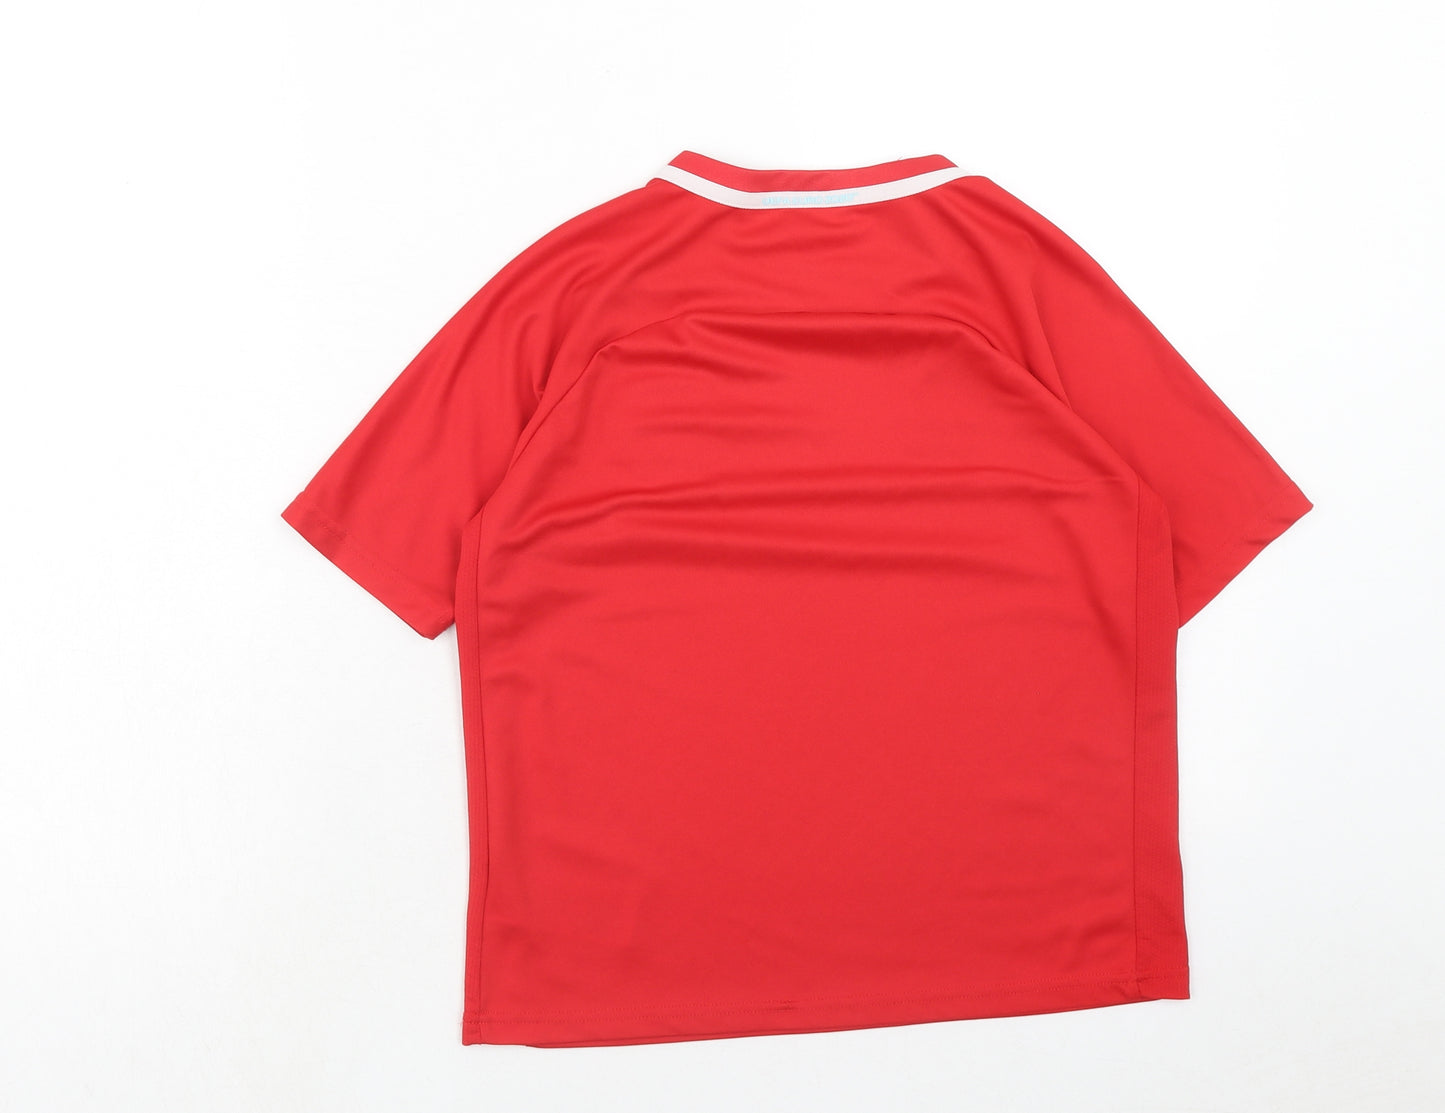 Sports Direct Boys Red Polyester Basic T-Shirt Size 11-12 Years Round Neck Pullover - Euro 2020 Wales